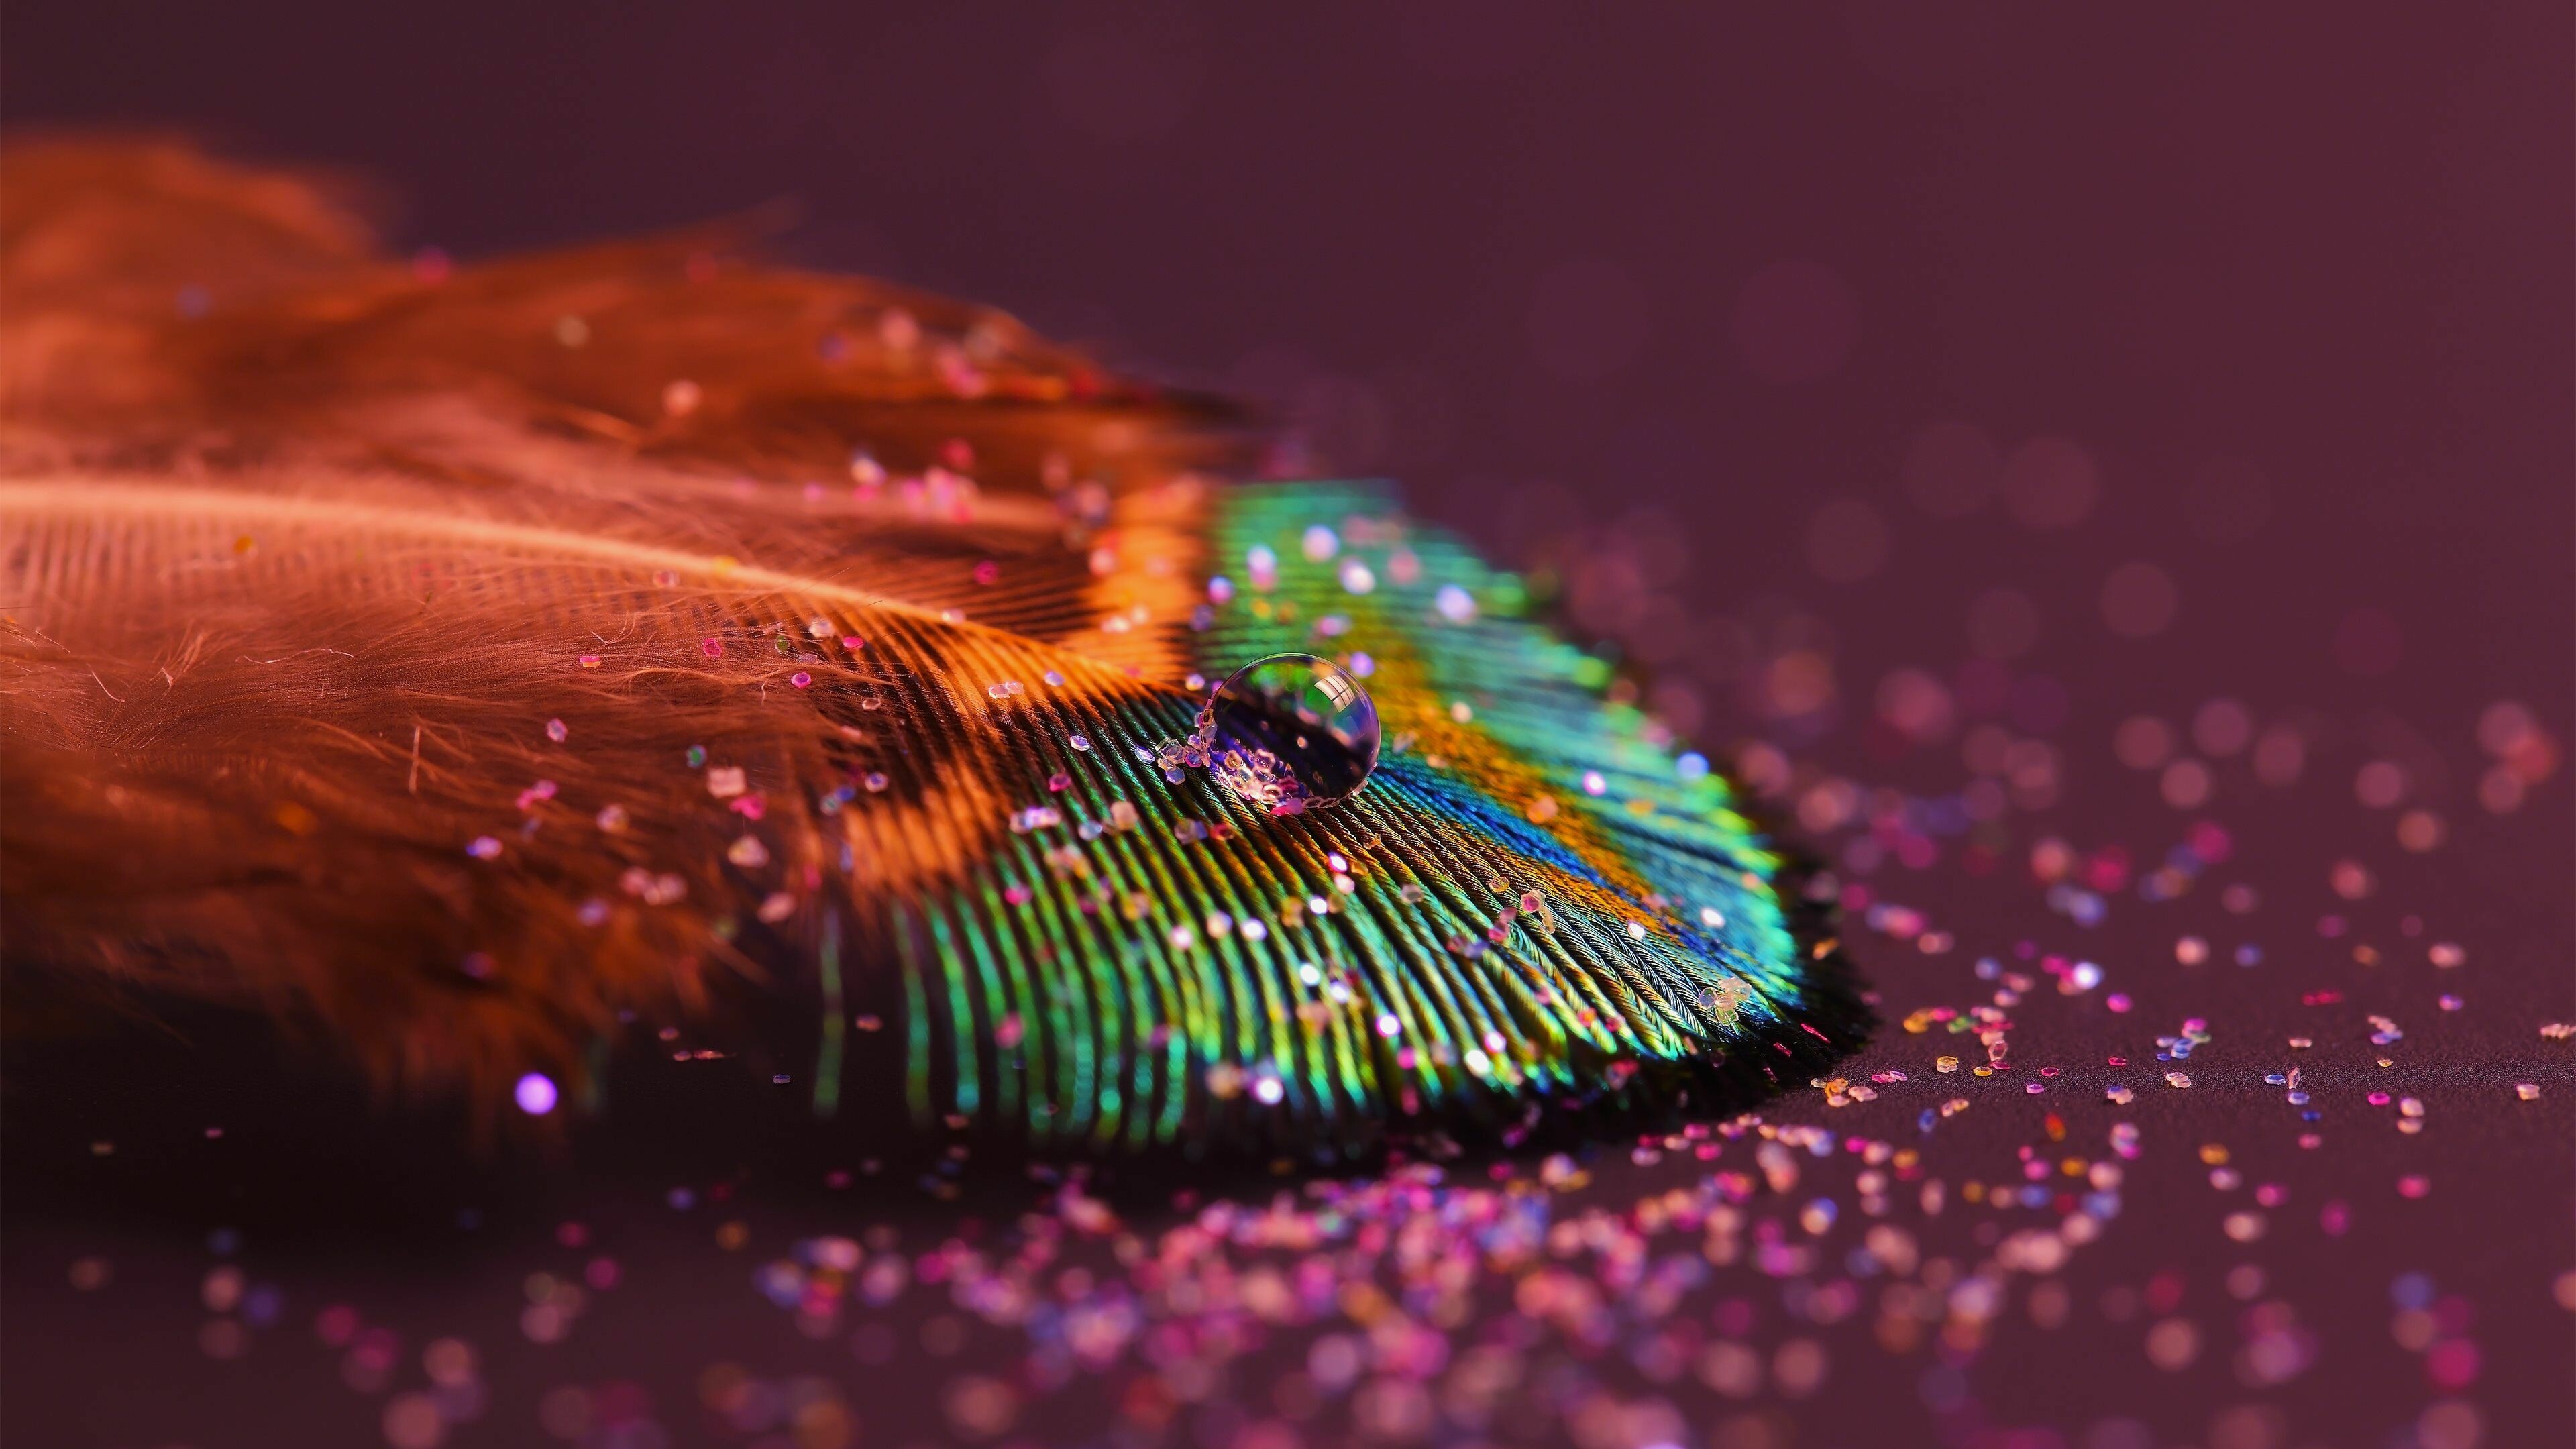 Sparkle: Glitter, A type of shiny material made of tiny pieces of shiny metal or plastic. 3840x2160 4K Wallpaper.